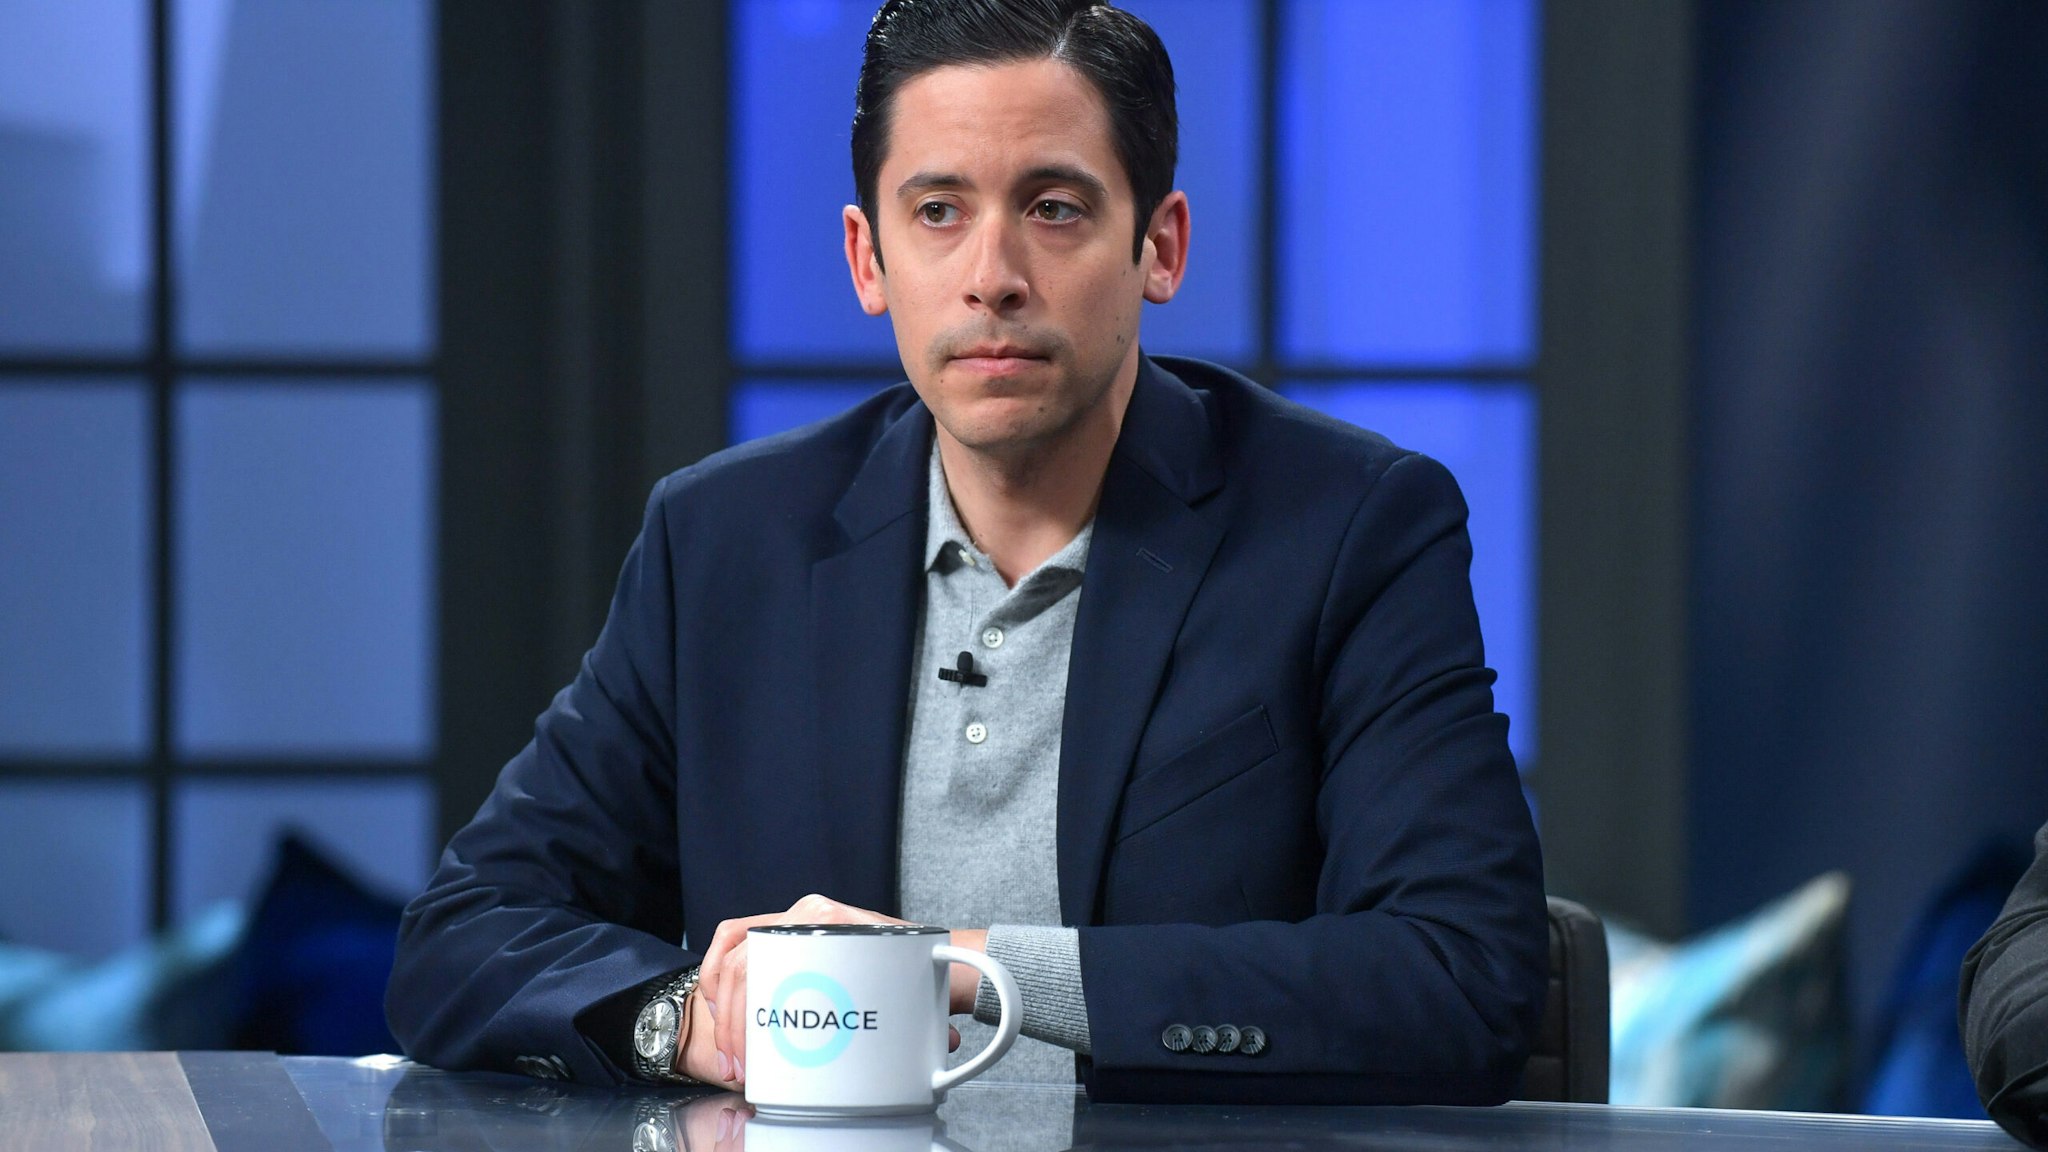 NASHVILLE, TENNESSEE - APRIL 19: Michael Knowles is seen on set of "Candace" on April 19, 2022 in Nashville, Tennessee. This episode will air Tuesday, April 26, 2022 (Photo by Jason Davis/Getty Images)